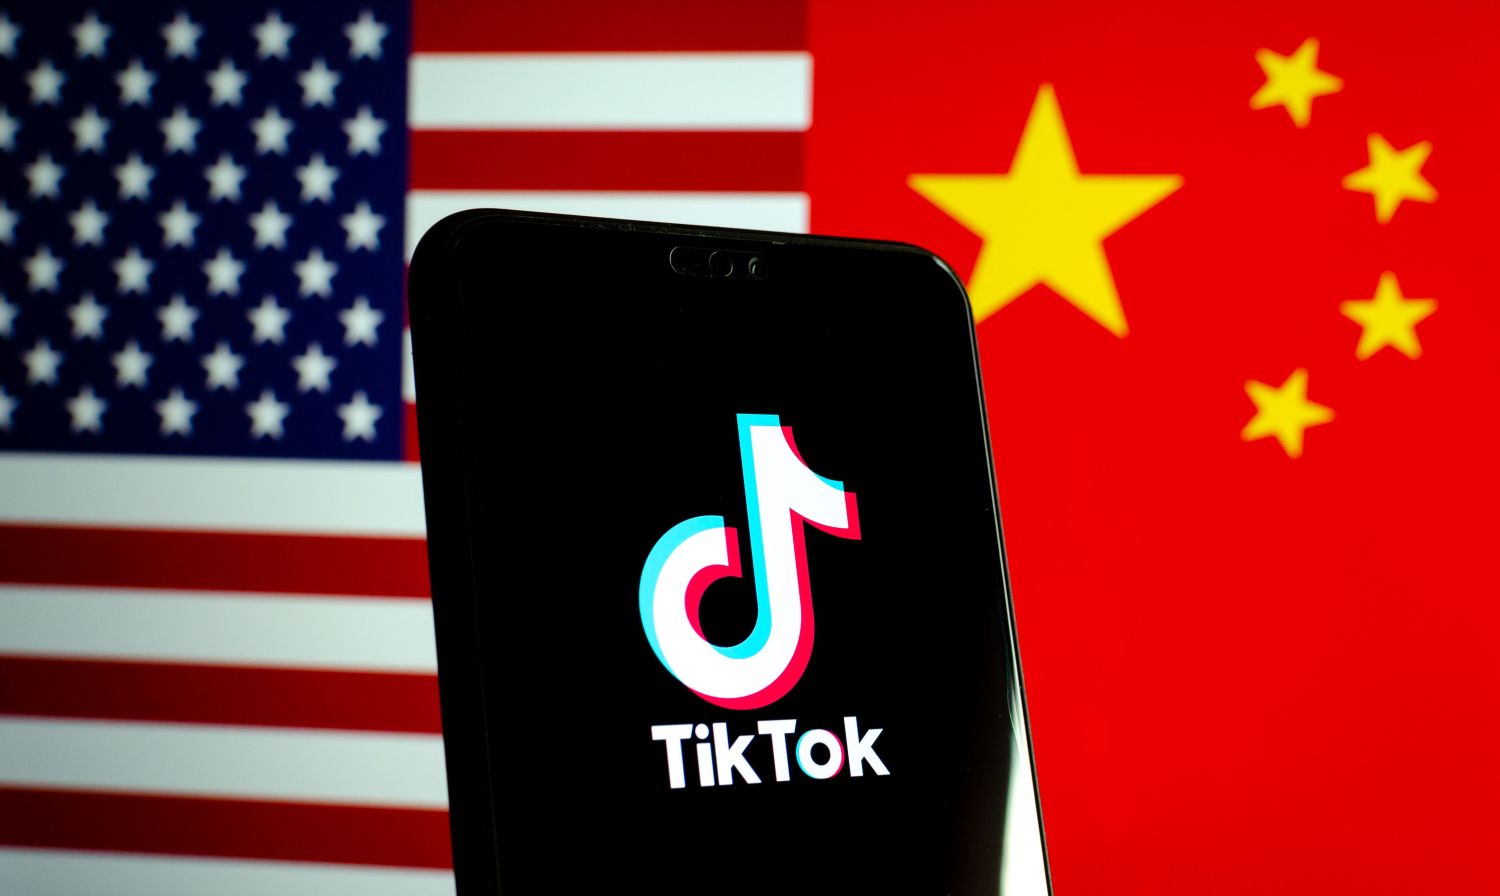 Phone with TikTok app open, over U.S. and Chinese flags